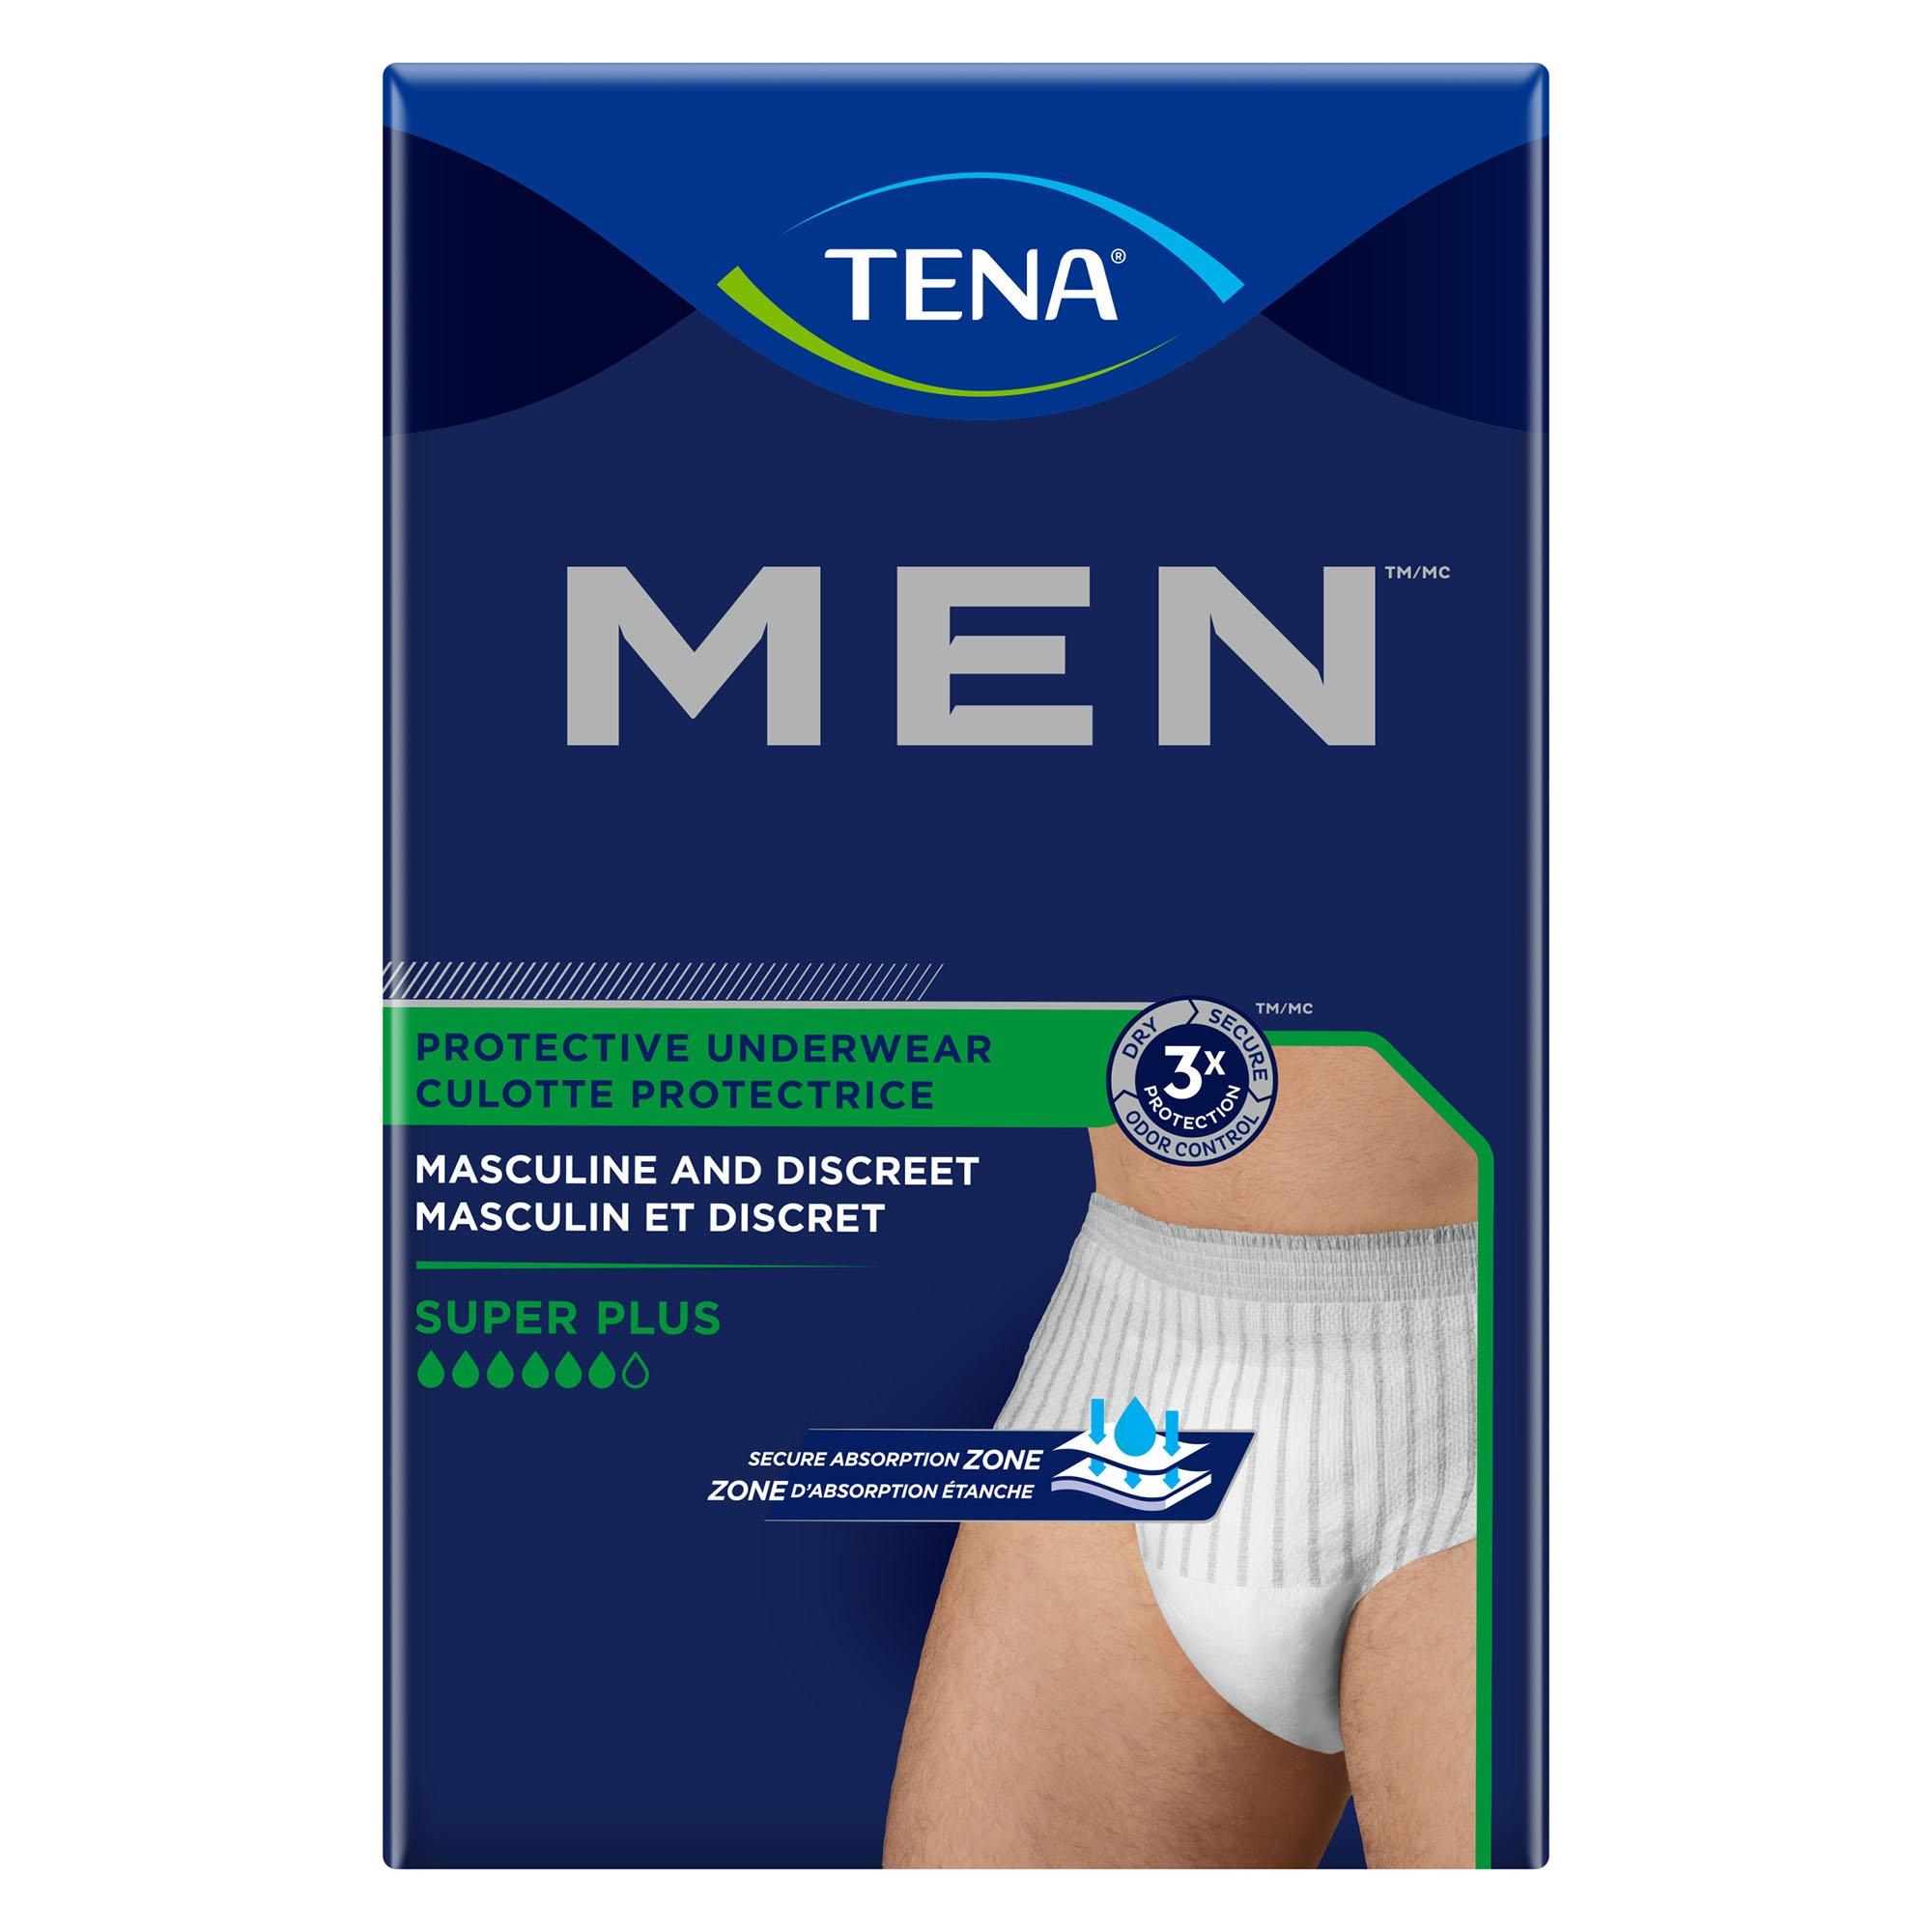 TENA Men's Incontinence Underwear, Super Plus Absorbency with